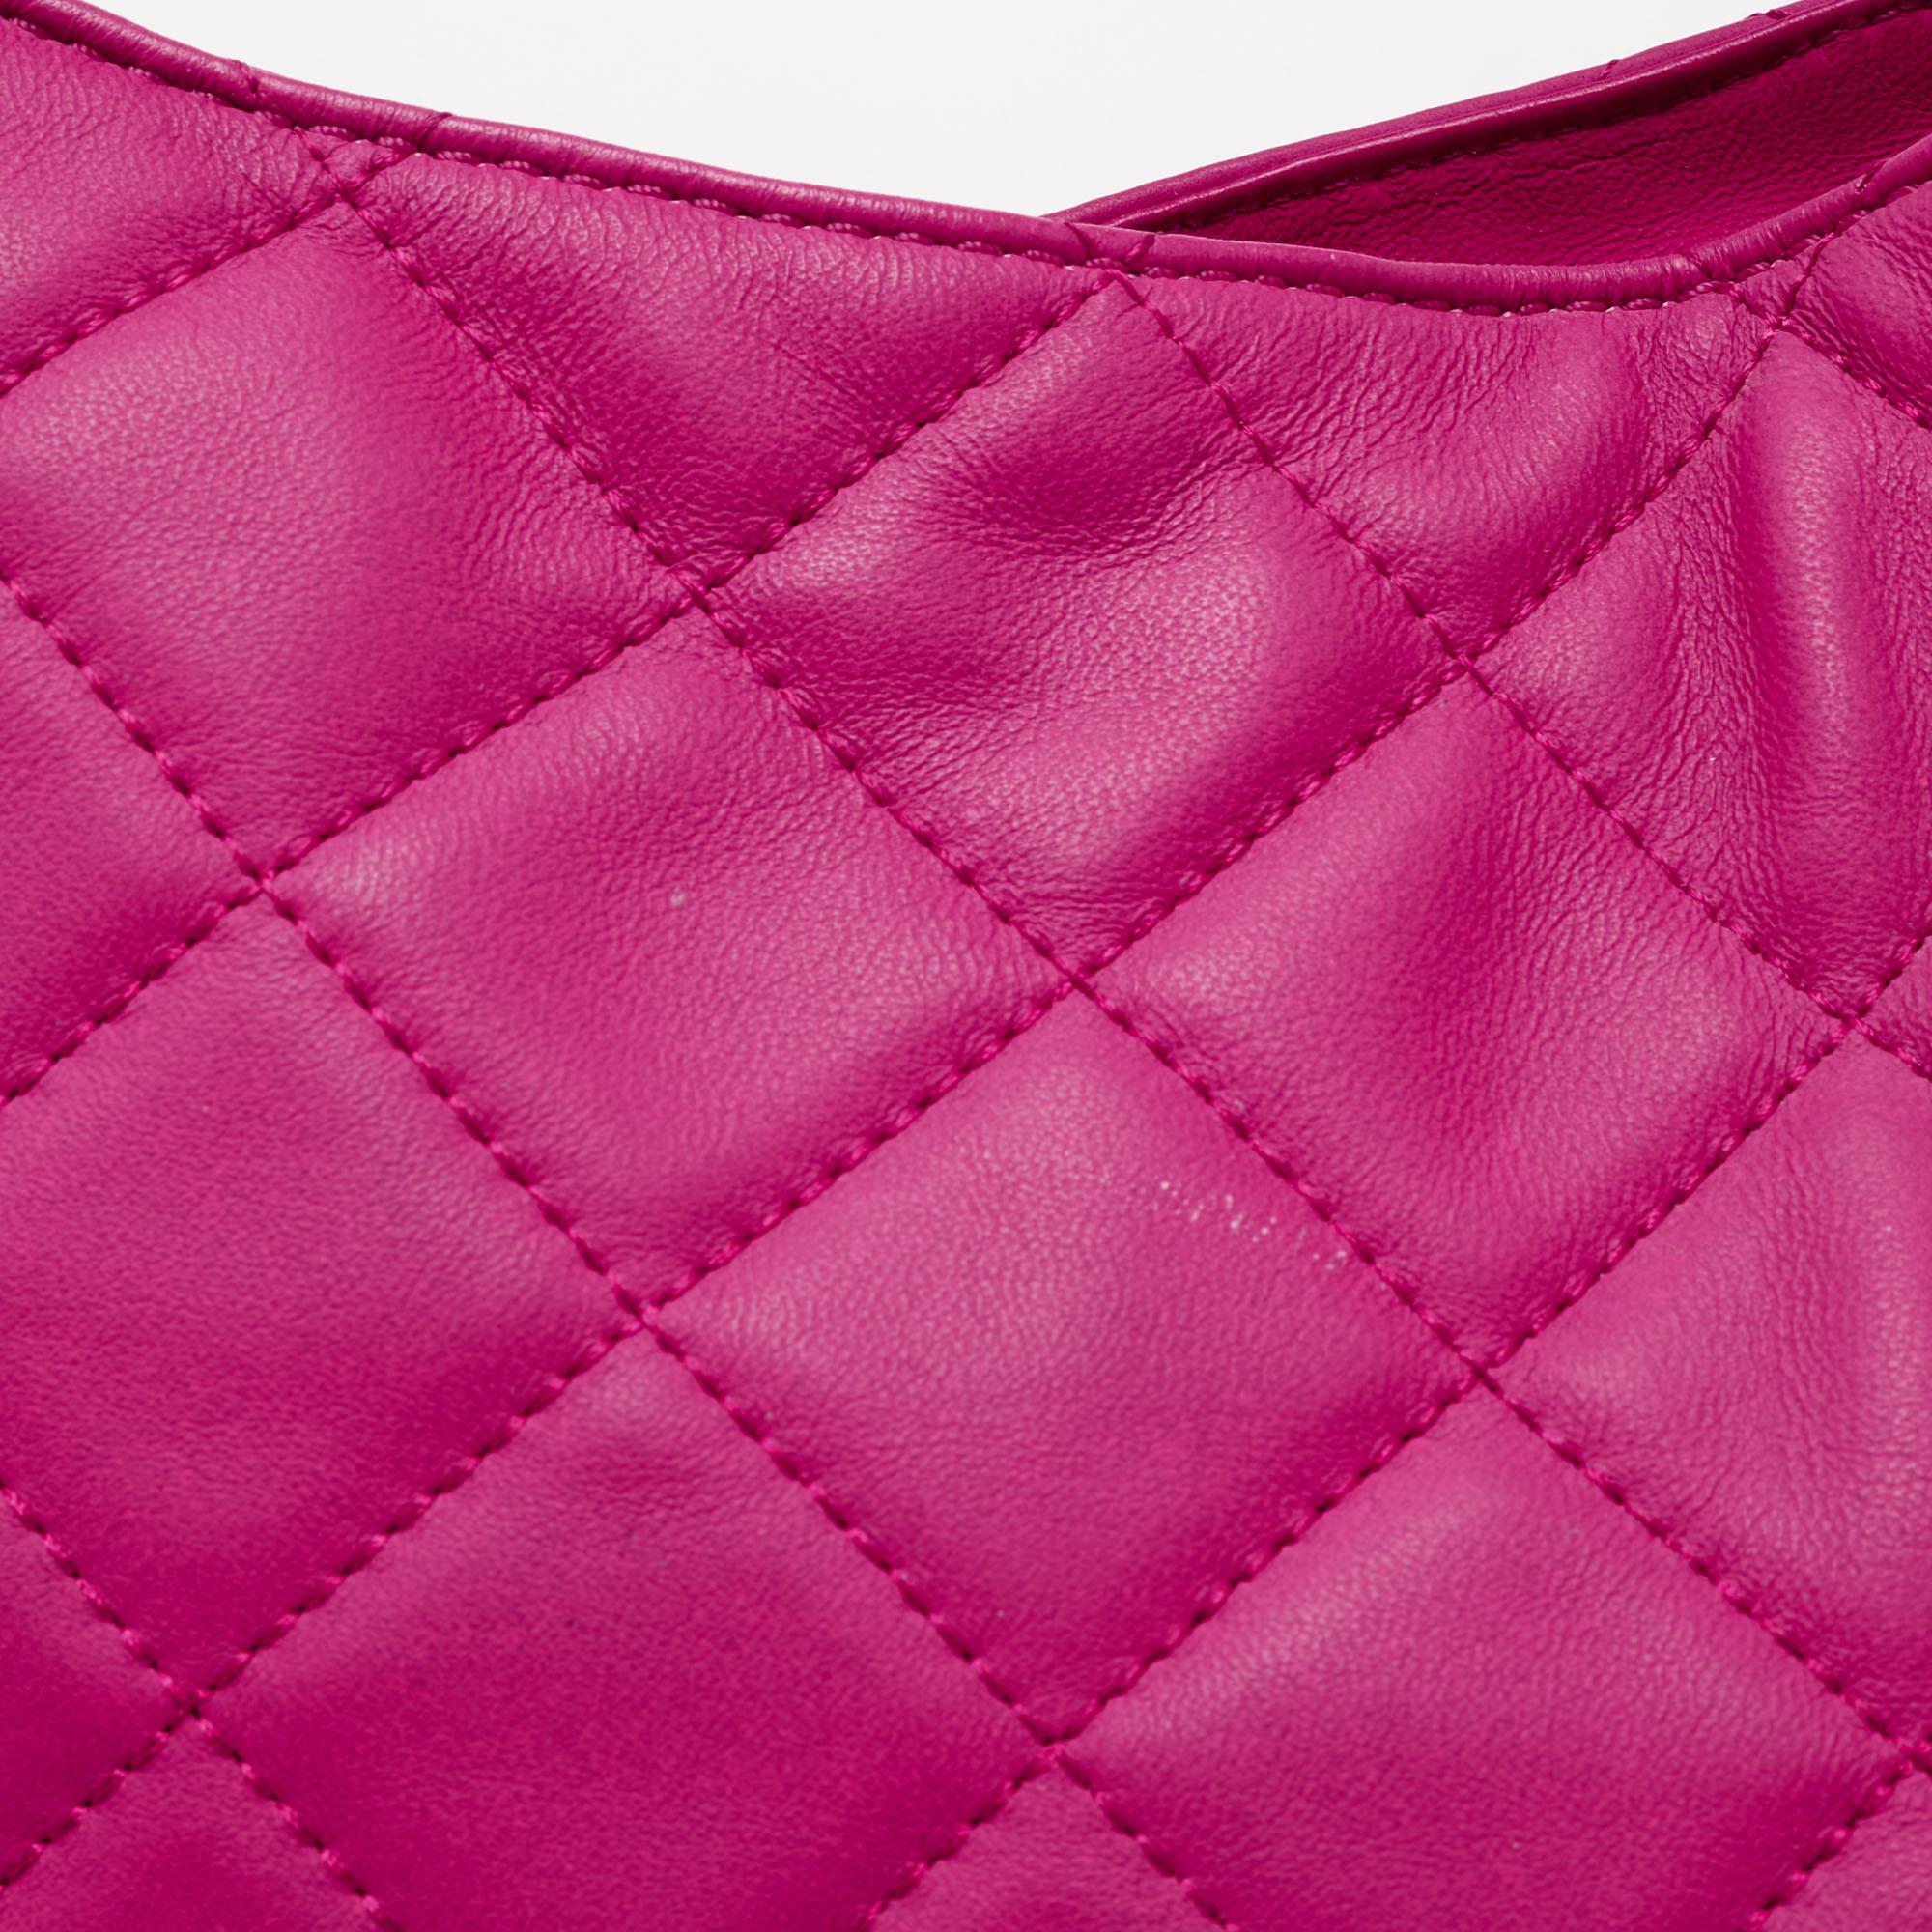 Women's MICHAEL Michael Kors Neon Pink Quilted Leather Susannah Hobo